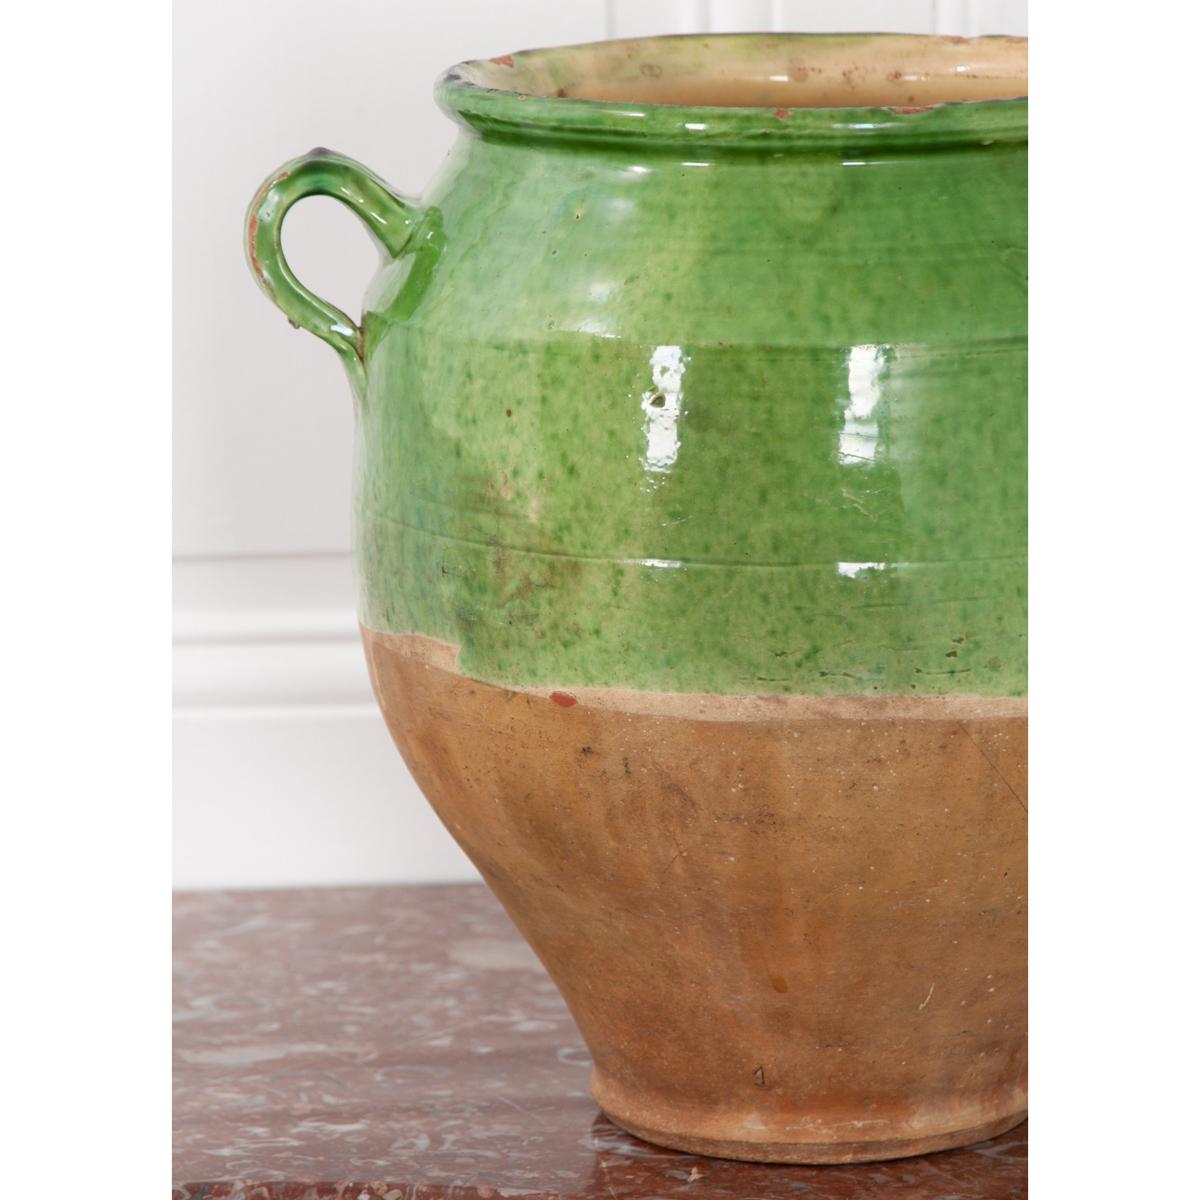 Green glazed confit jar for storing meat and fat. Most of these jars are only glazed on the top half of the exterior and on the inside. While the exterior is green, the interior is glazed in yellow. The bottom half of the exterior is unglazed as it